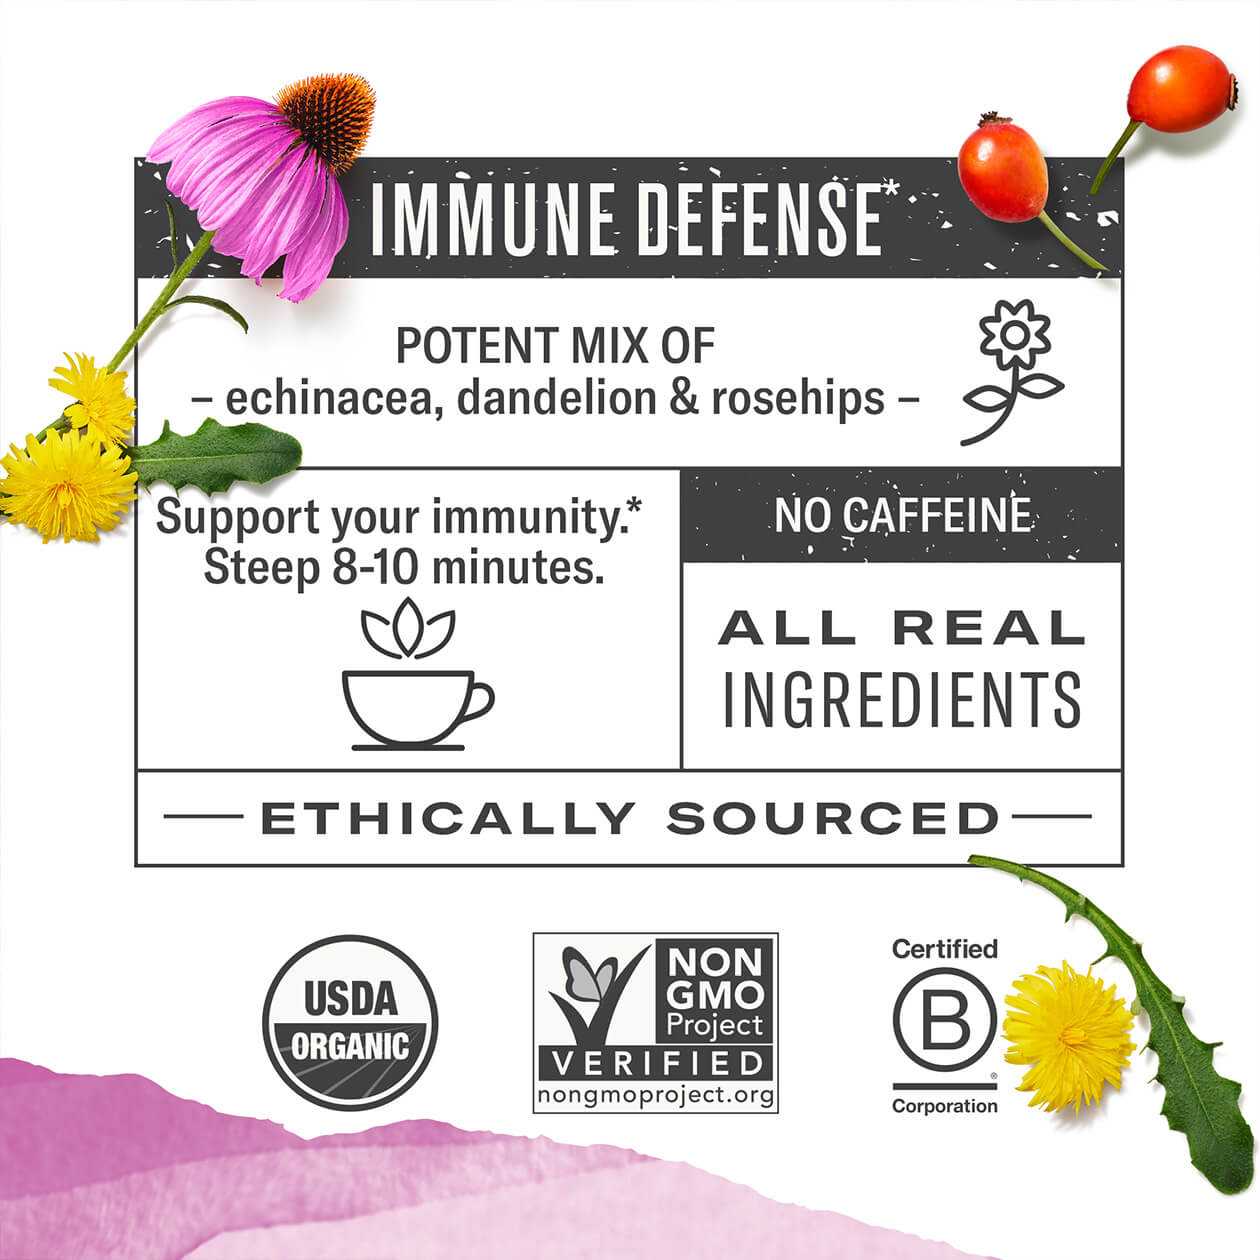 Infographic about Immune Boost: steep 8-10 minutes, caffeine free, all real ingredients, ethically sourced